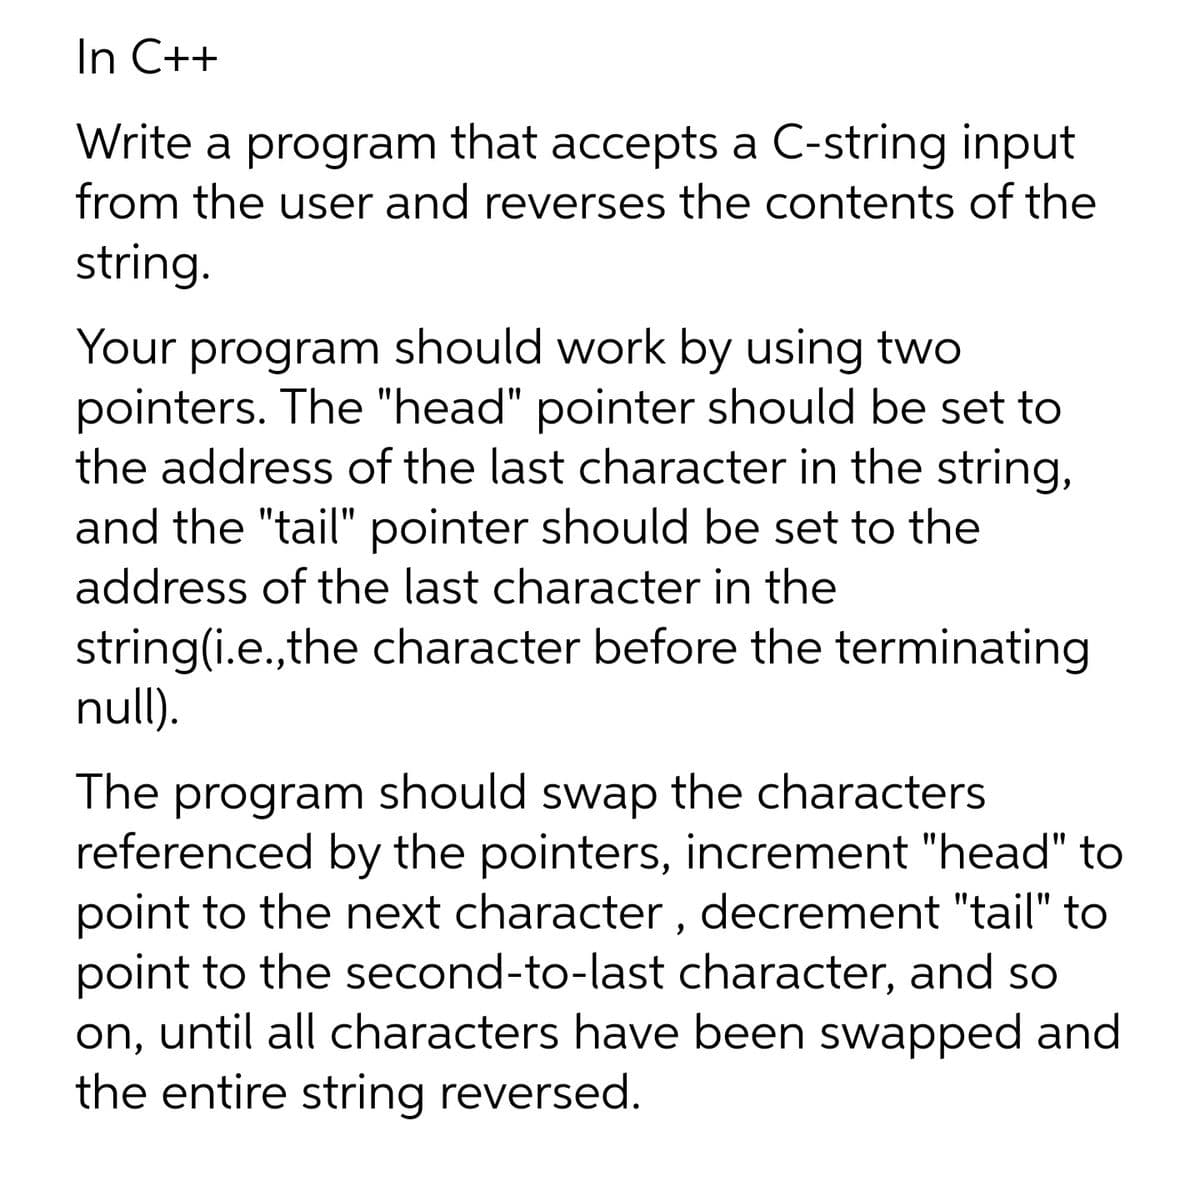 In C++
Write a program that accepts a C-string input
from the user and reverses the contents of the
string.
Your program should work by using two
pointers. The "head" pointer should be set to
the address of the last character in the string,
and the "tail" pointer should be set to the
address of the last character in the
string(i.e.,the character before the terminating
null).
The program should swap the characters
referenced by the pointers, increment "head" to
point to the next character , decrement "tail" to
point to the second-to-last character, and so
on, until all characters have been swapped and
the entire string reversed.
